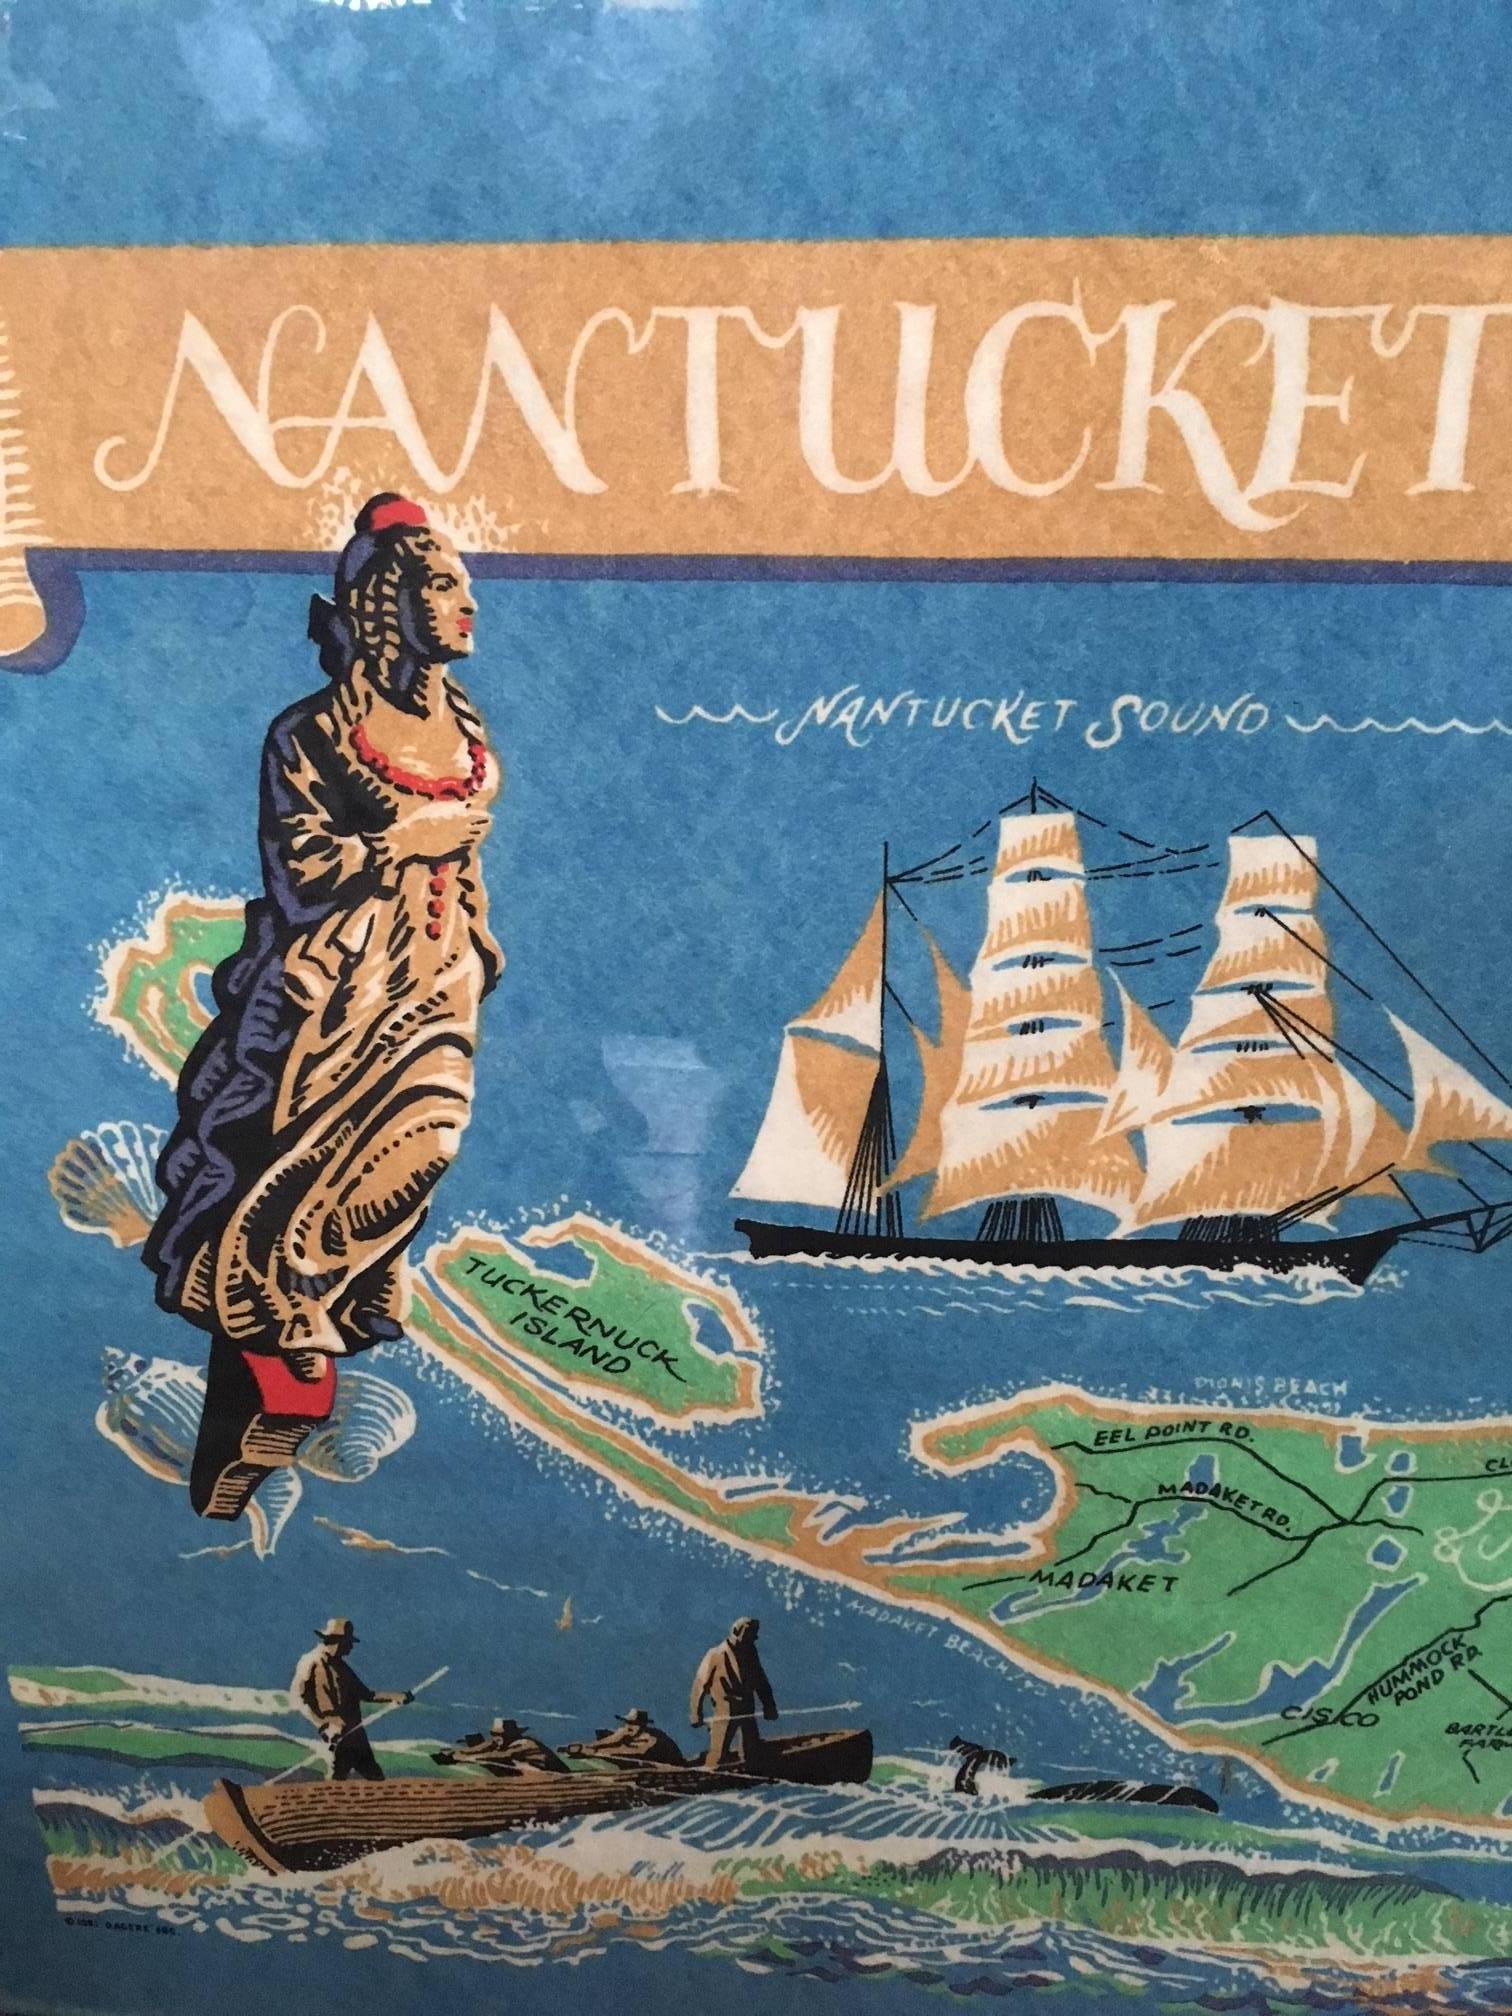 Vintage hand colored map of Nantucket by Sol Levenson (1910-2006), an extremely rare decorative map of Nantucket Island, printed on non-woven fabric (quilting interface fabric) and hand colored and detailed, hand signed in the lower right and